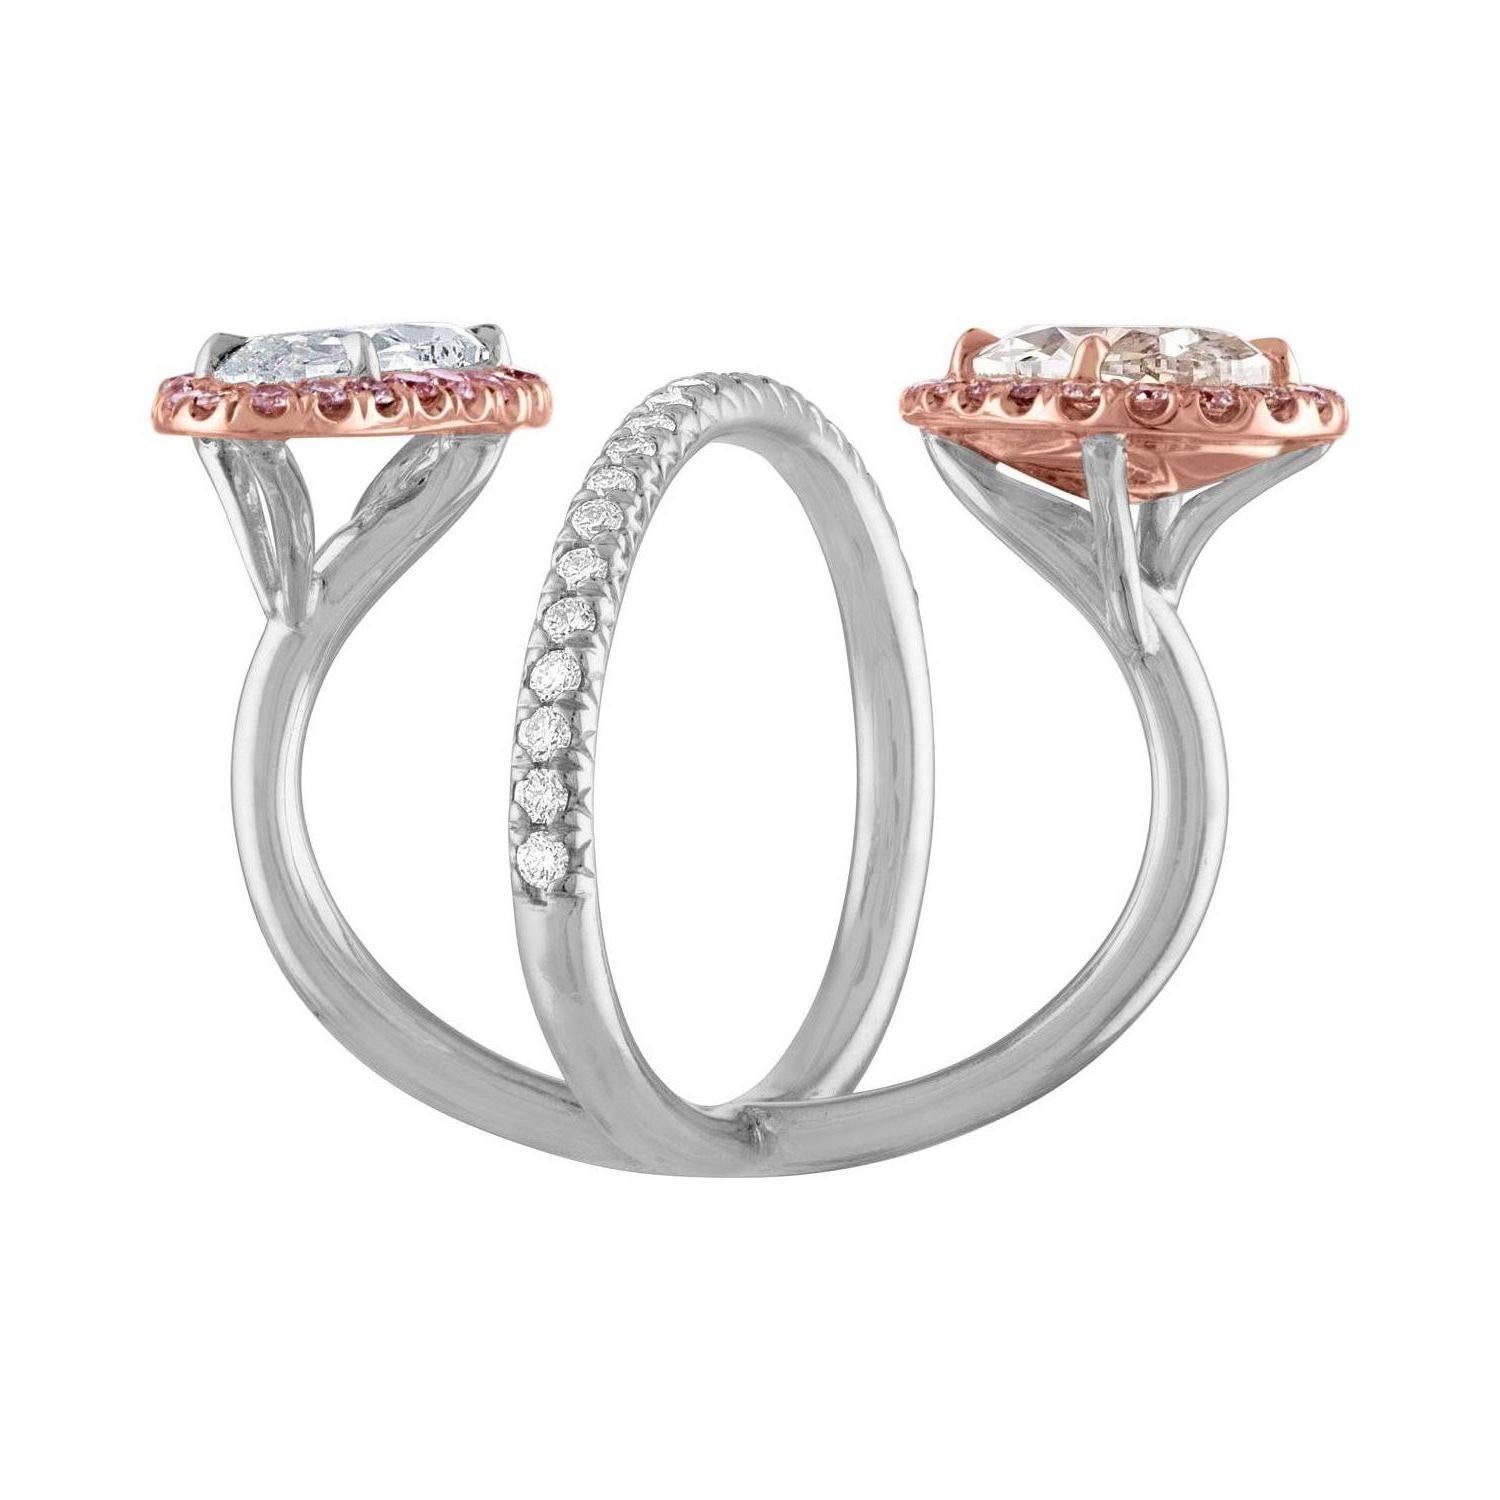 GIA Certified 2.15 Carat Brown-Pink Oval Diamond is set with another 1.55 Carat Oval Diamond, GIA Certified as well.
Both are set in hand crafted Platinum & 18K Rose Gold Mounting.
GIA Certificate number for the 2.15 Carat Oval Diamond is 16238395